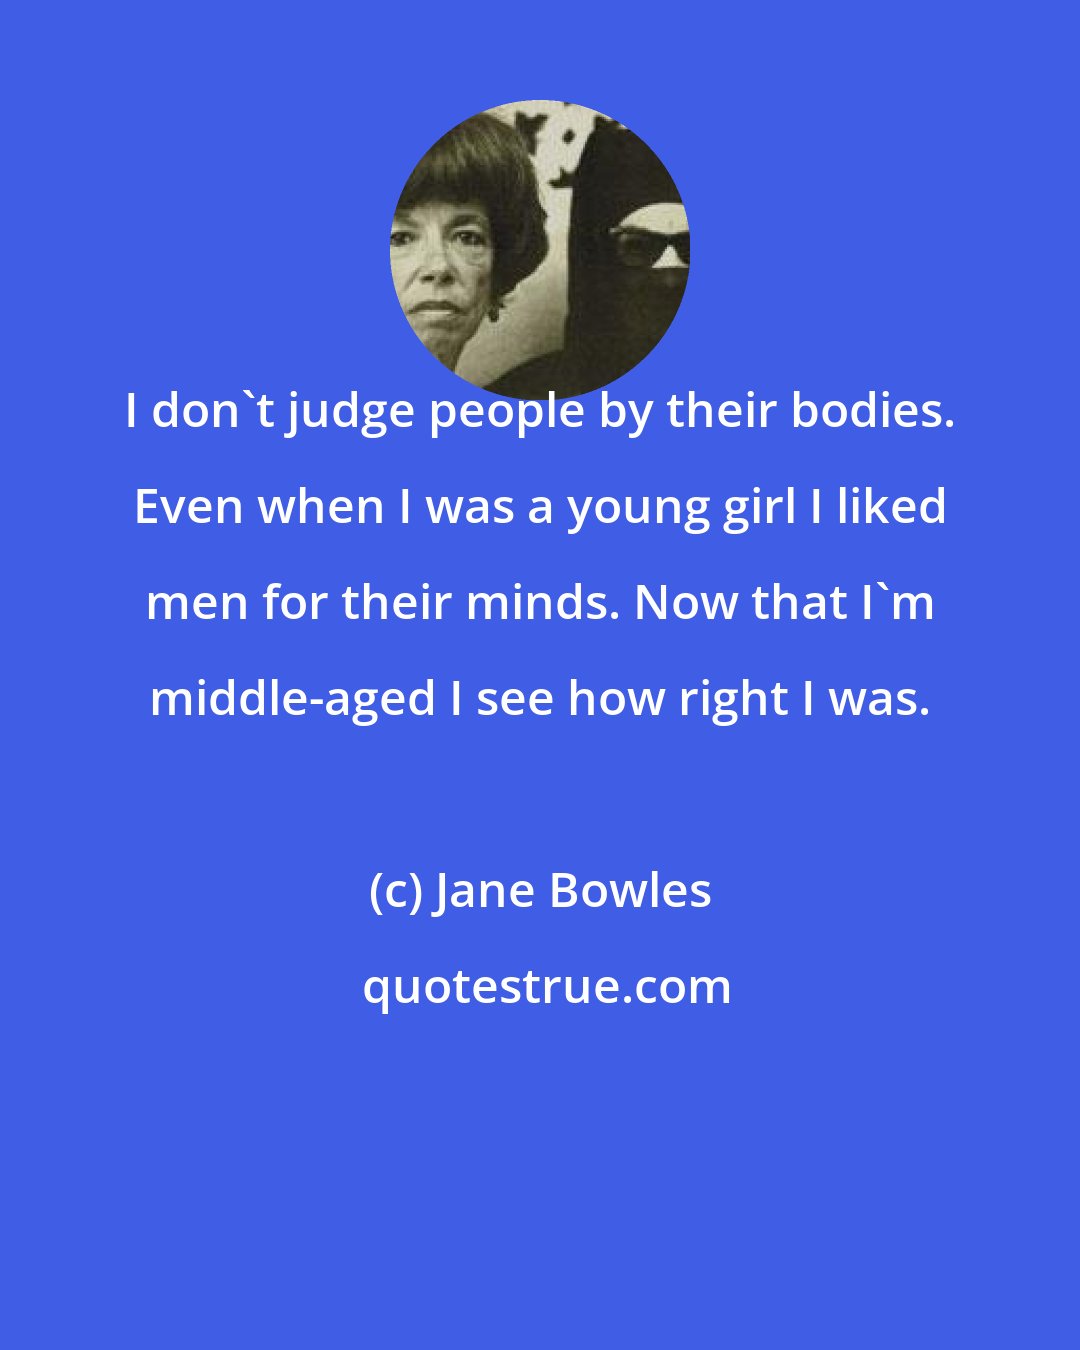 Jane Bowles: I don't judge people by their bodies. Even when I was a young girl I liked men for their minds. Now that I'm middle-aged I see how right I was.